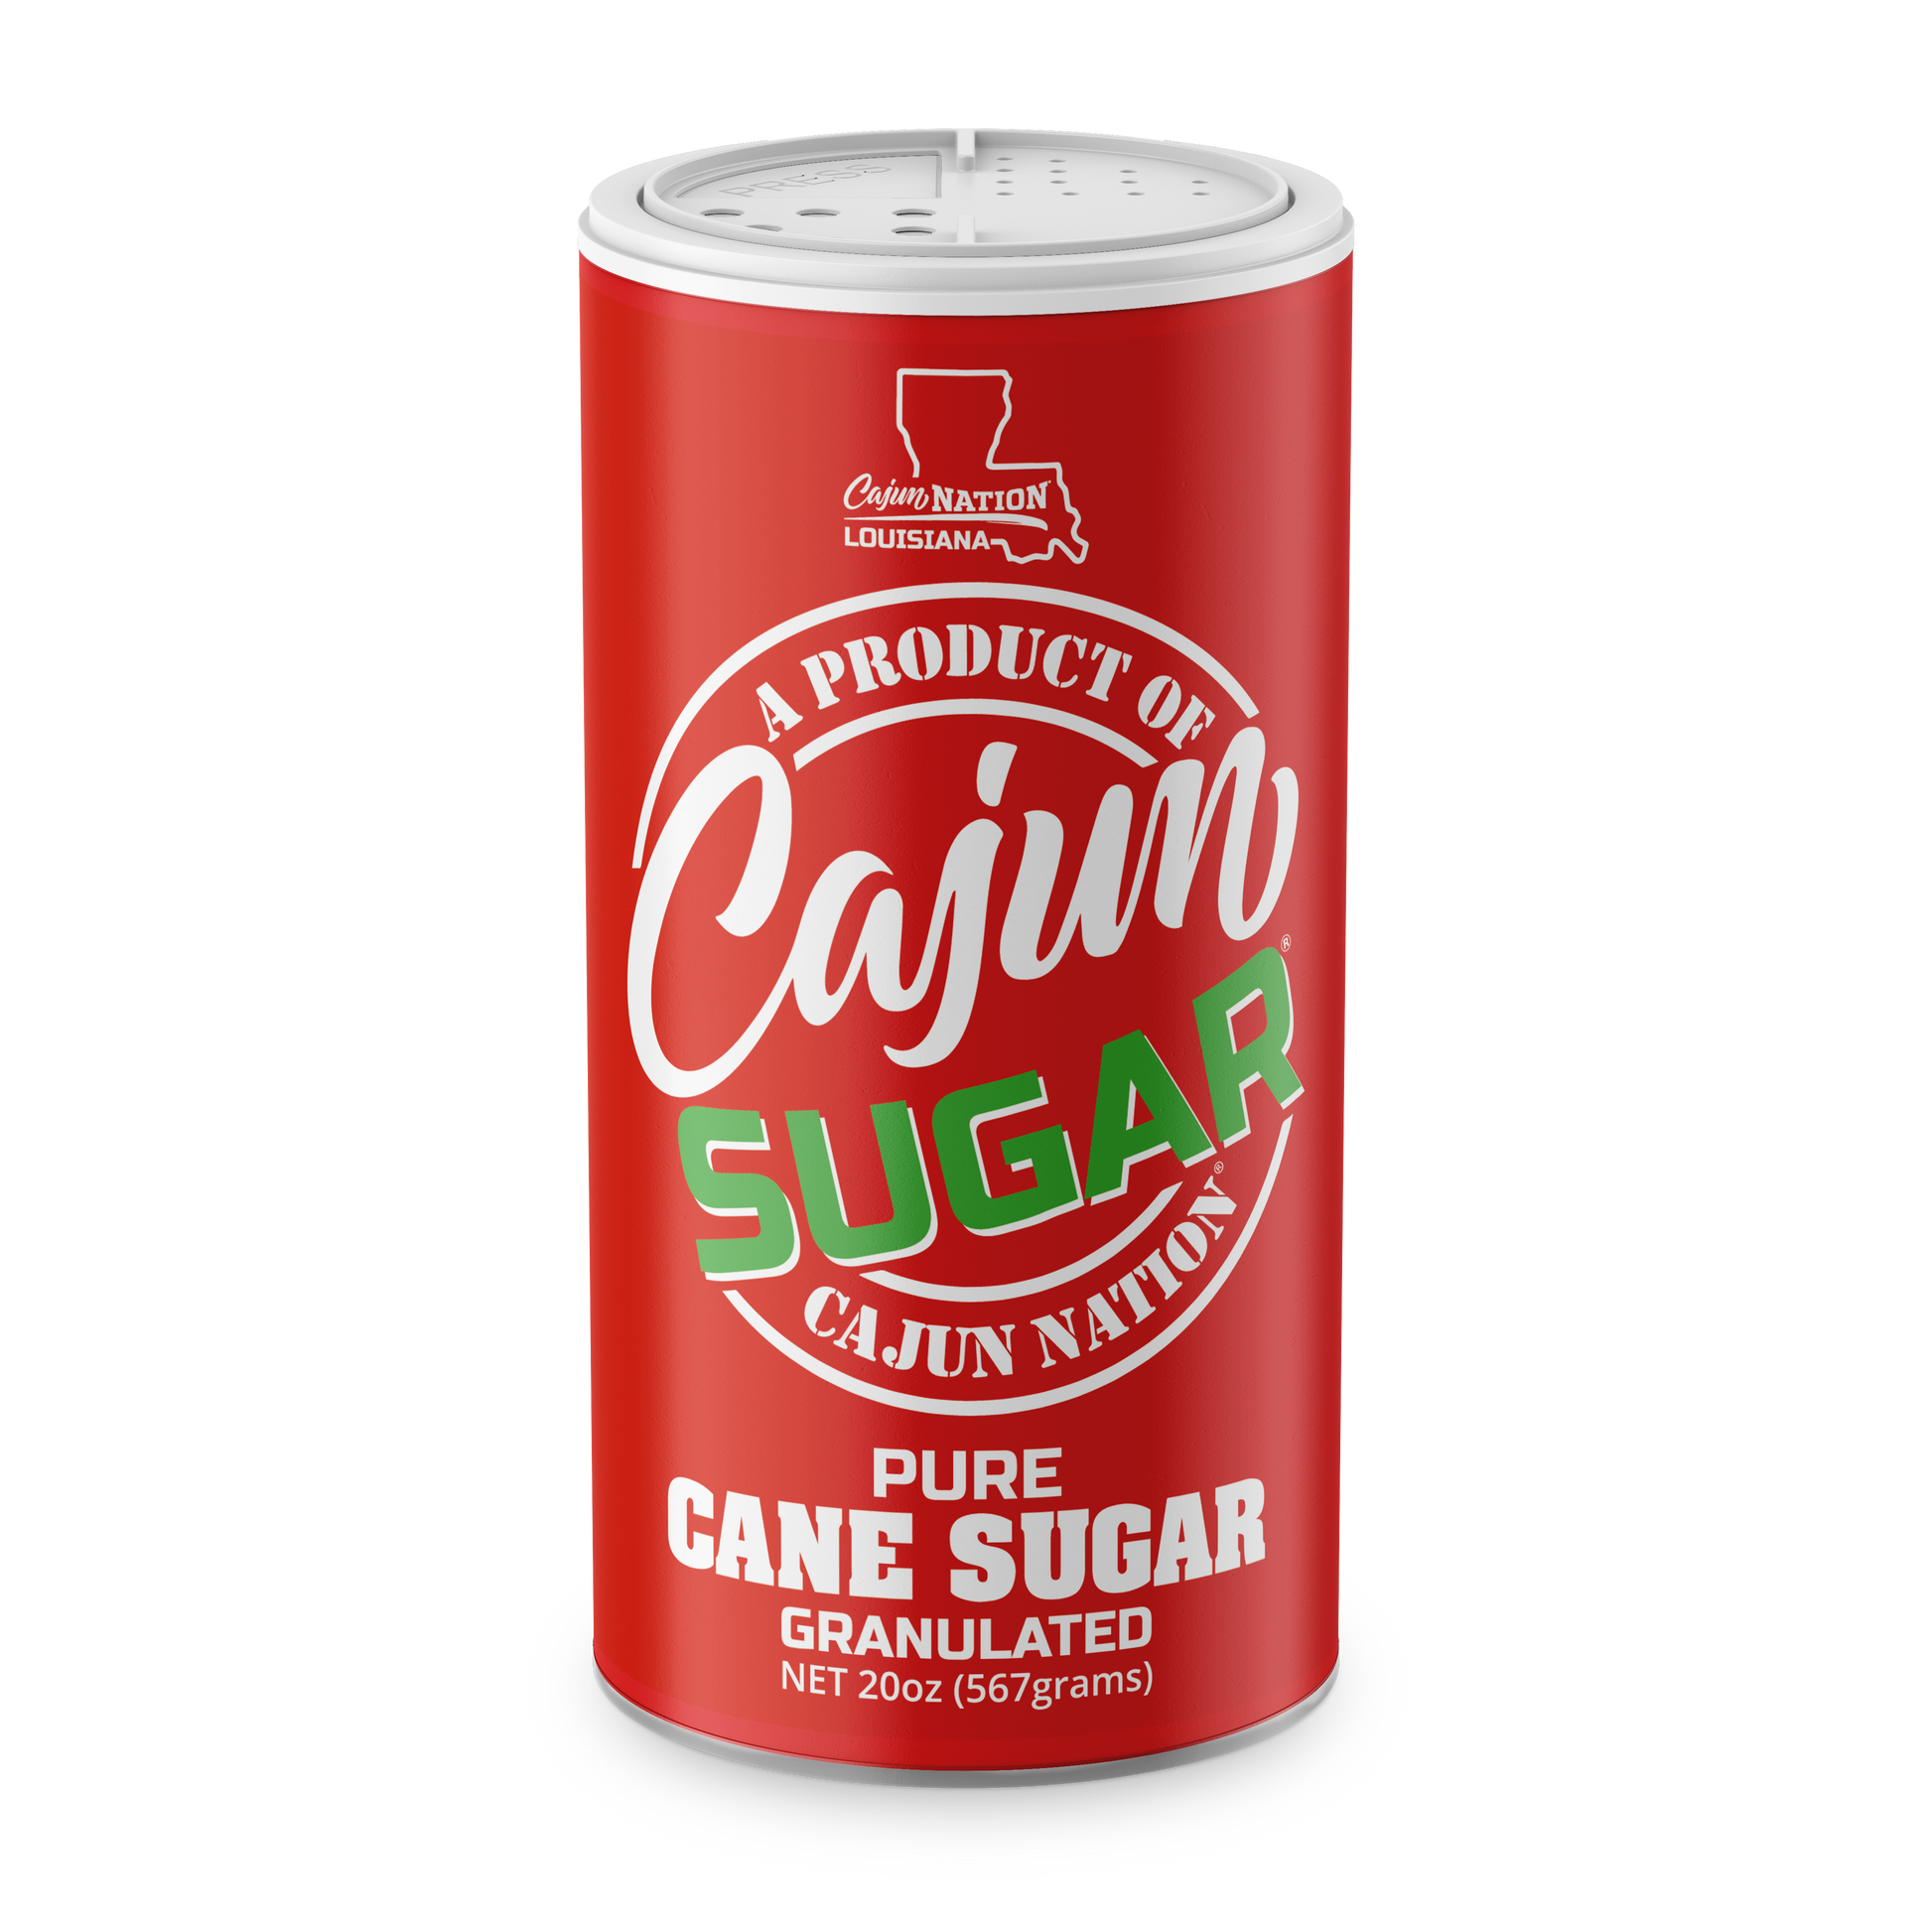  Cajun Sugar is 100% Granulated White Sugar, 20 oz, PURE CANE SUGAR Ingredients: Sugar.  Ideal for sweetening beverages, table use, and baking. 